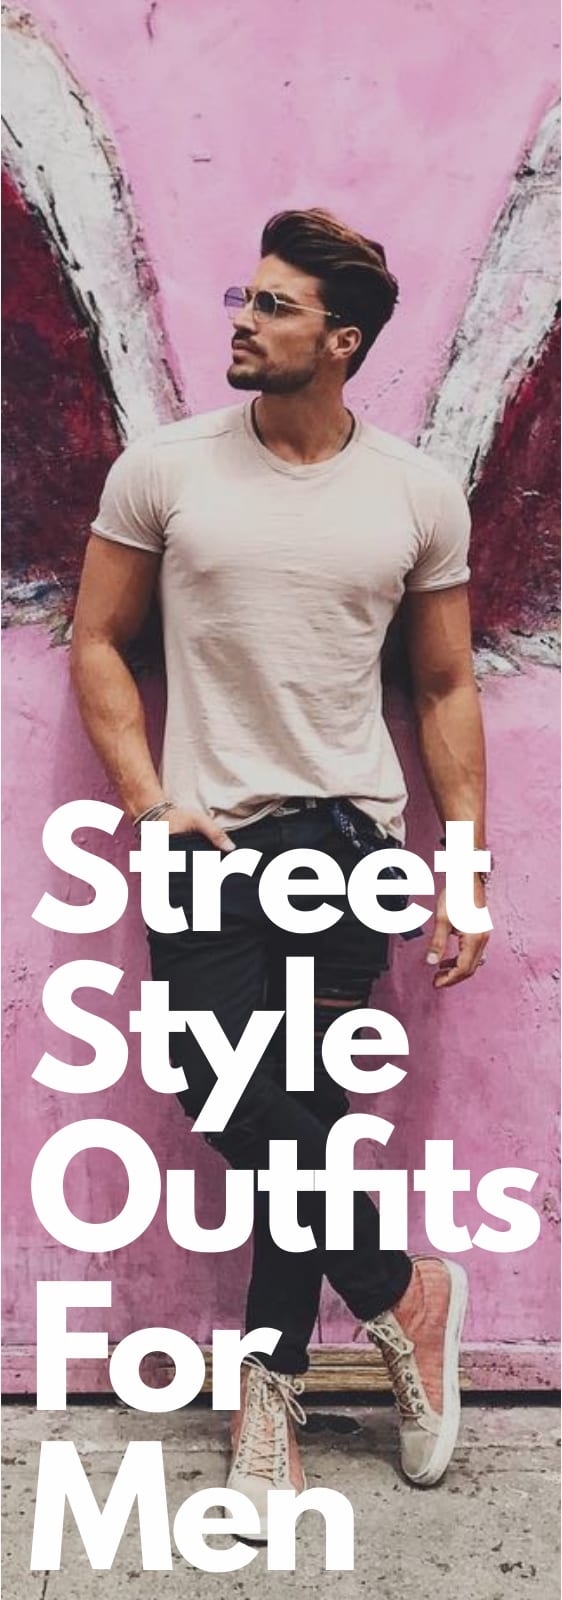 Best Street Style Outfit Ideas For Men